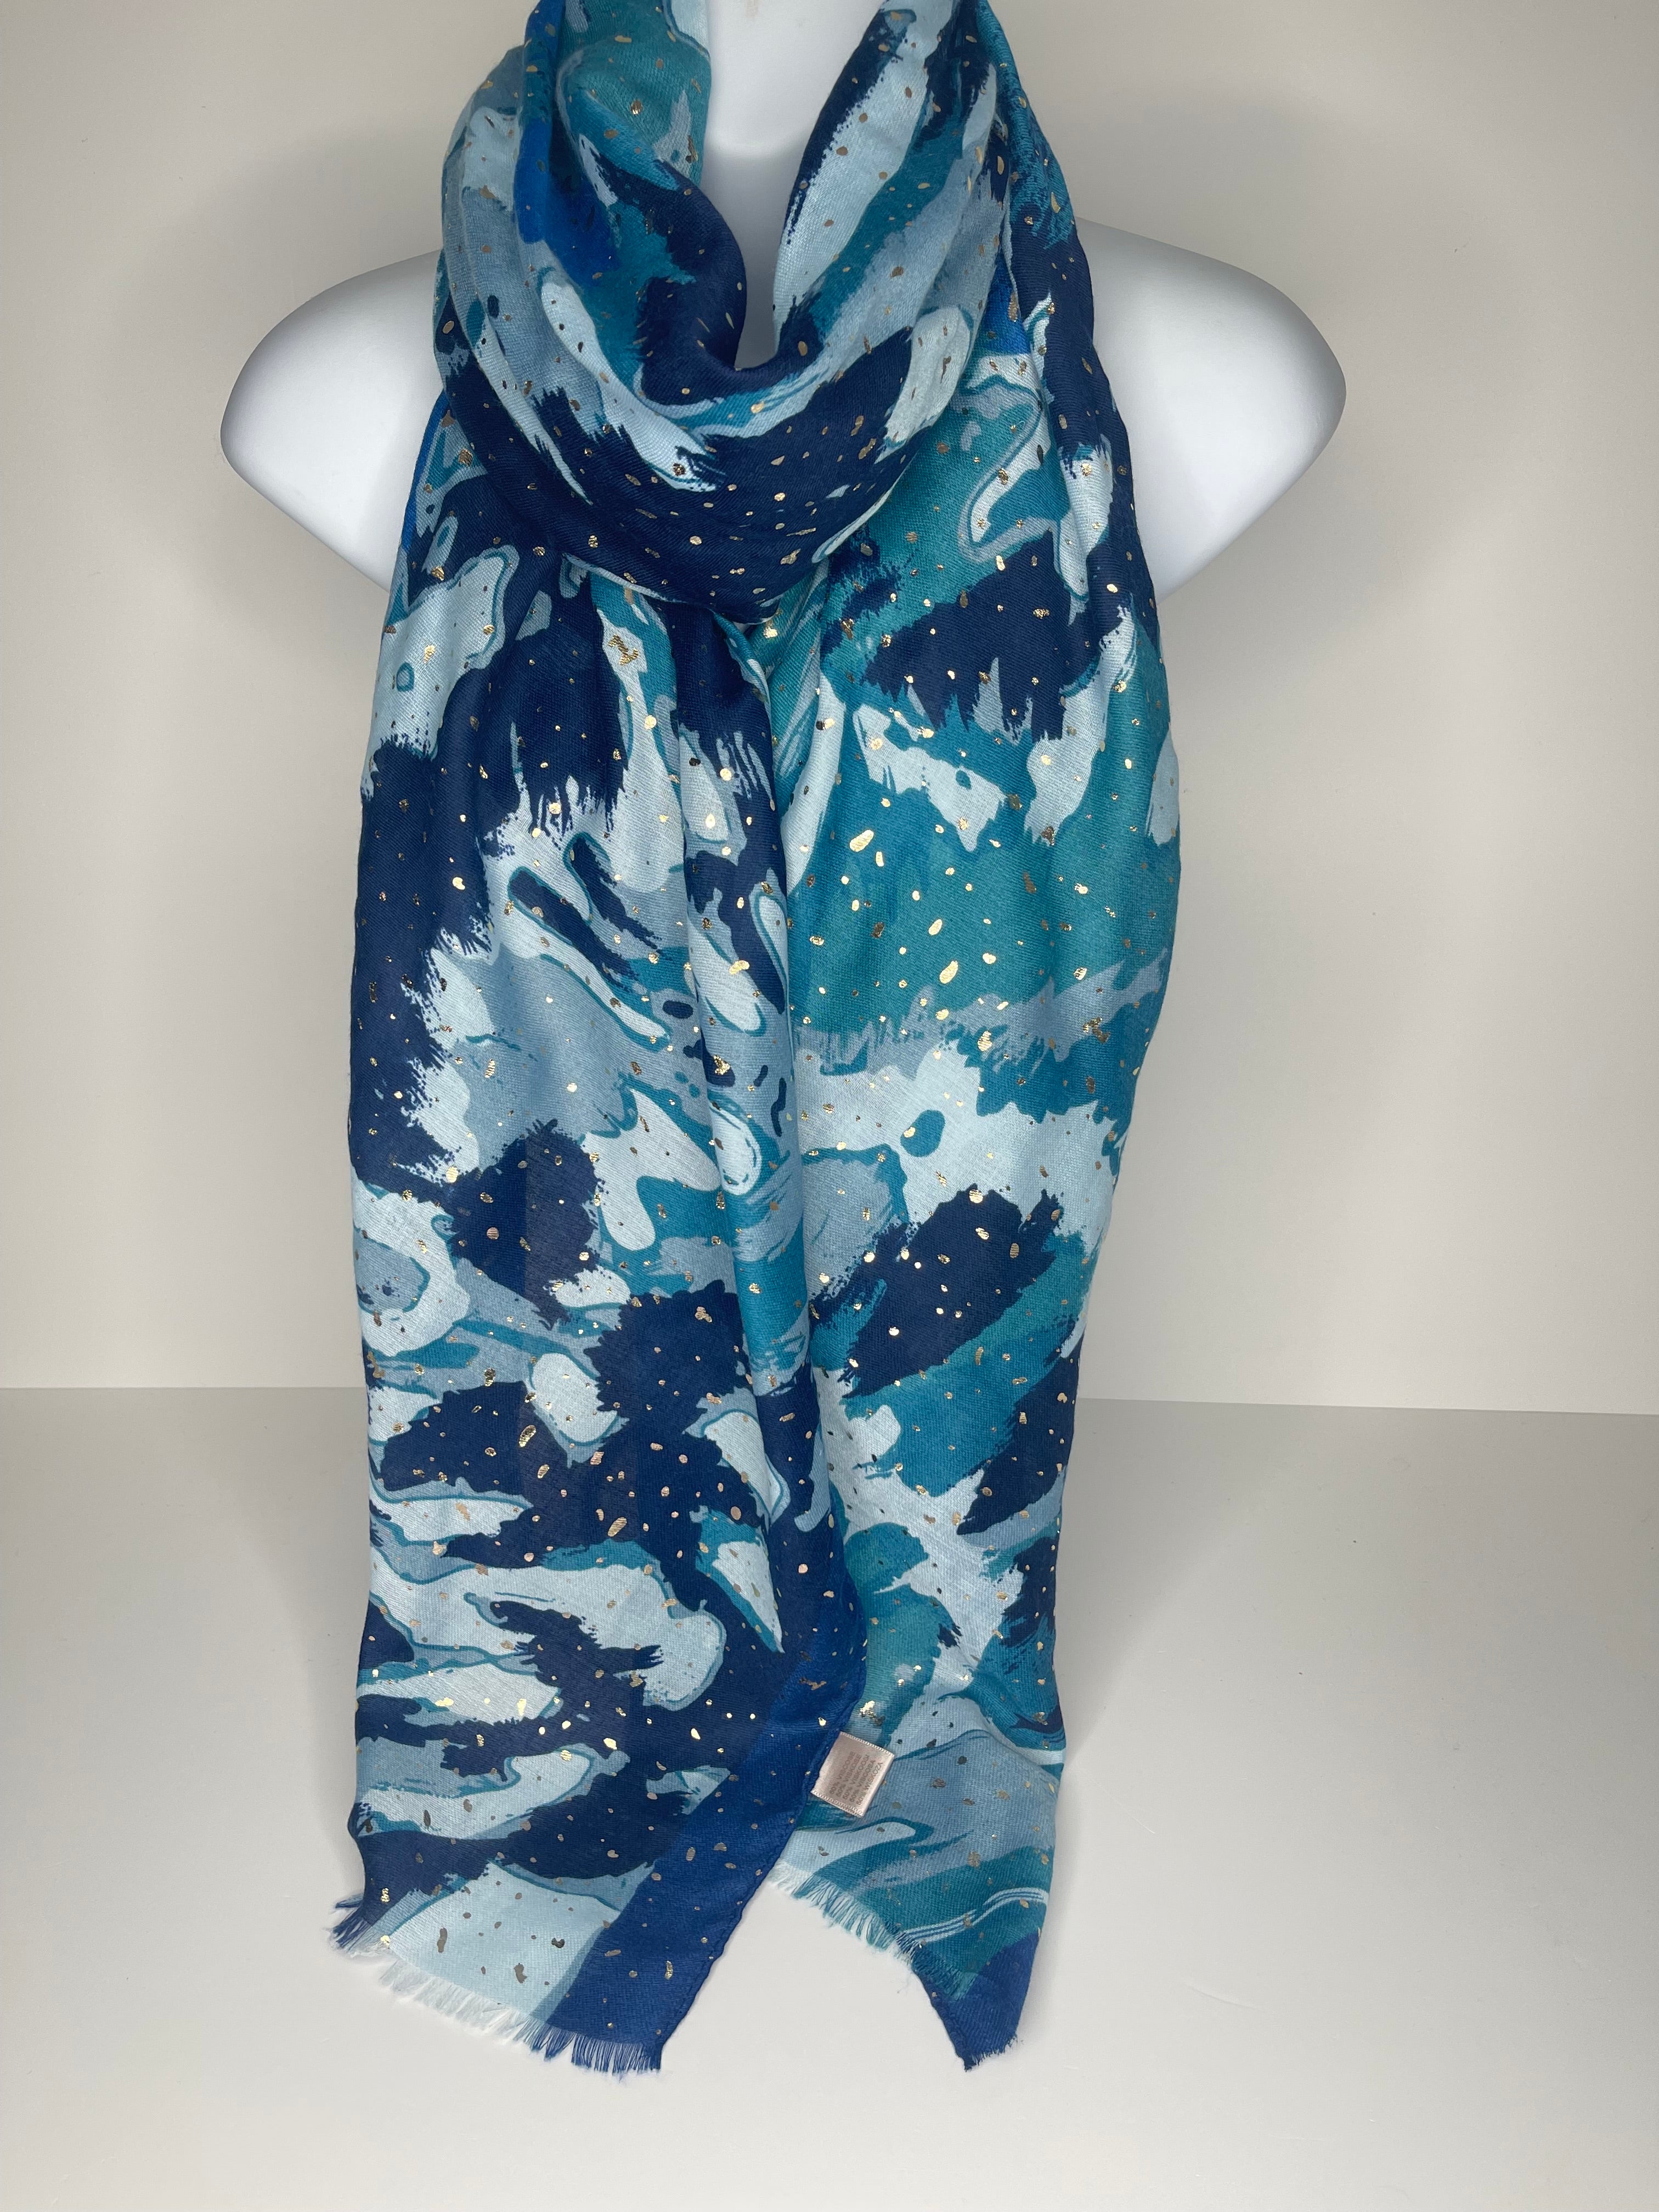 Lighter weight rose glitter paint splash print scarf in shades of blue, aqua, green and baby blue